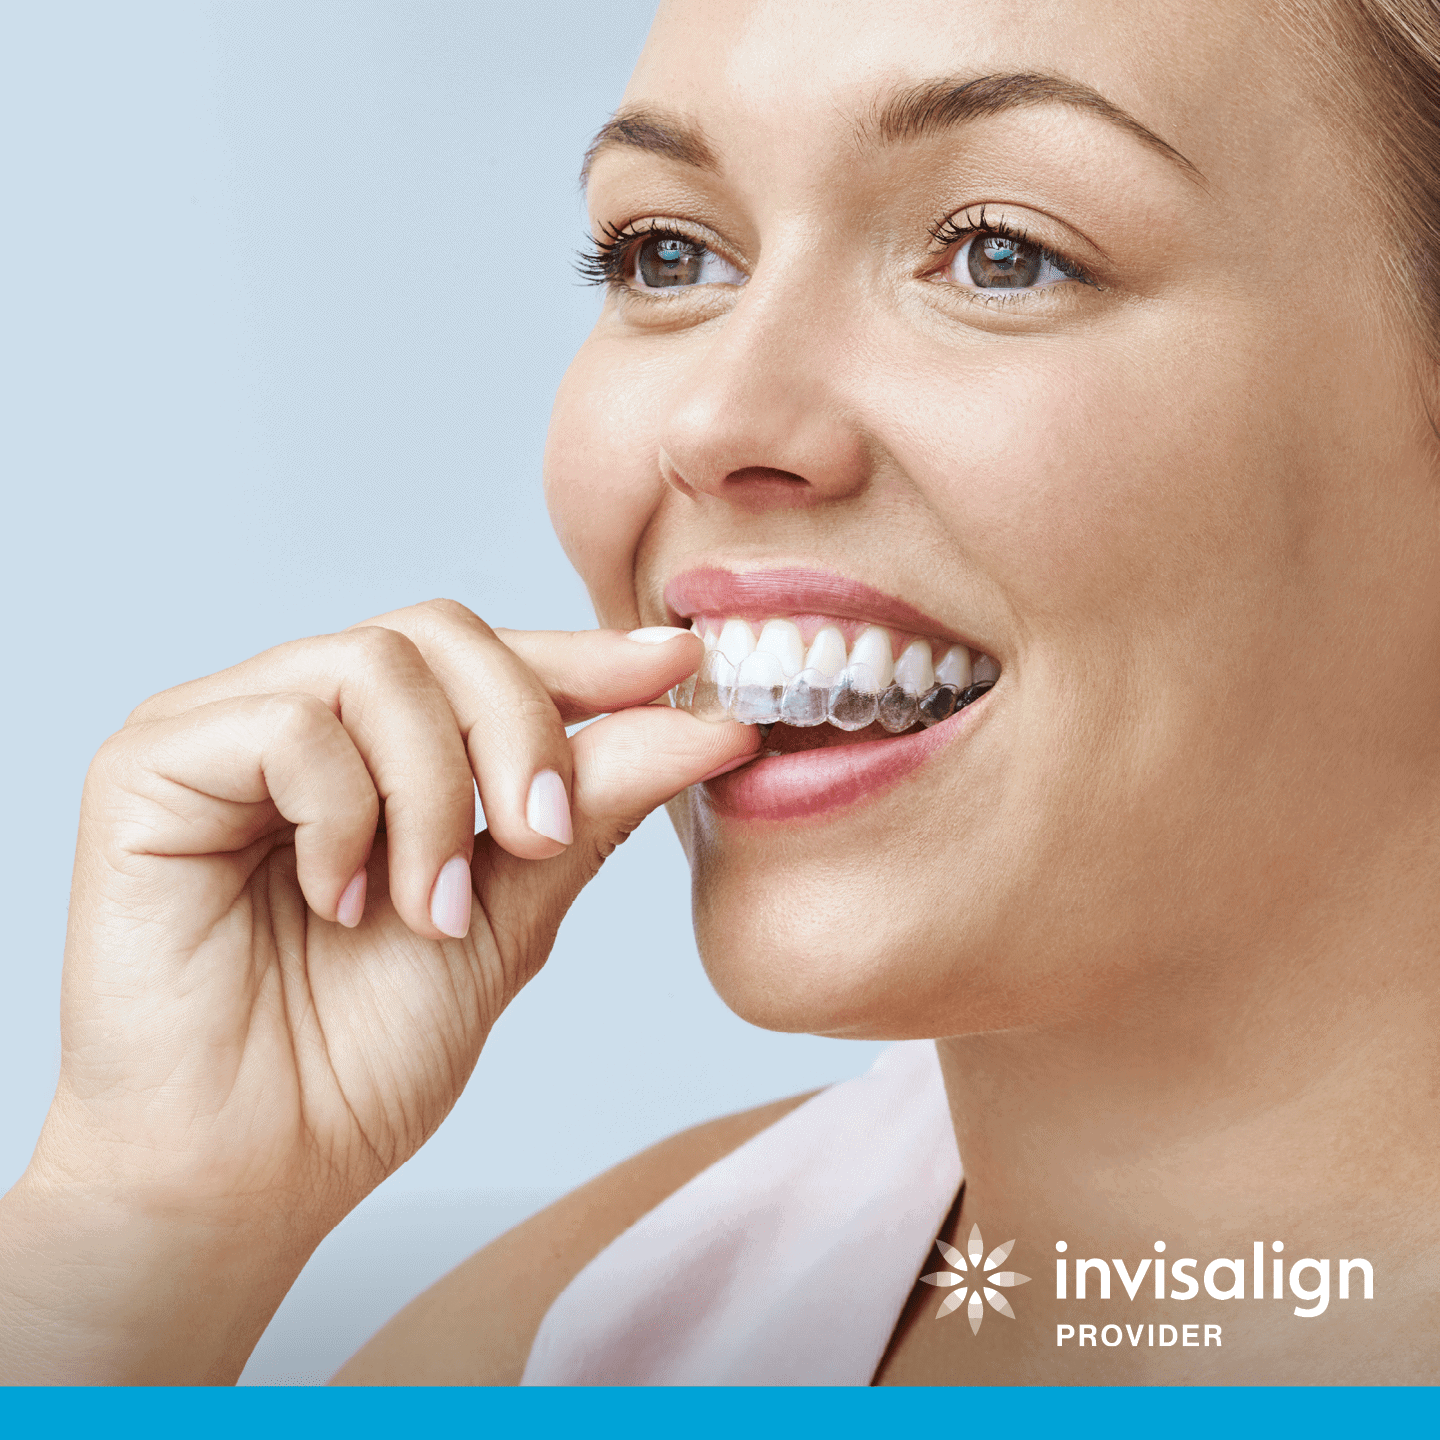 Invisalign Provider - Get ready for something great. Start with your smile